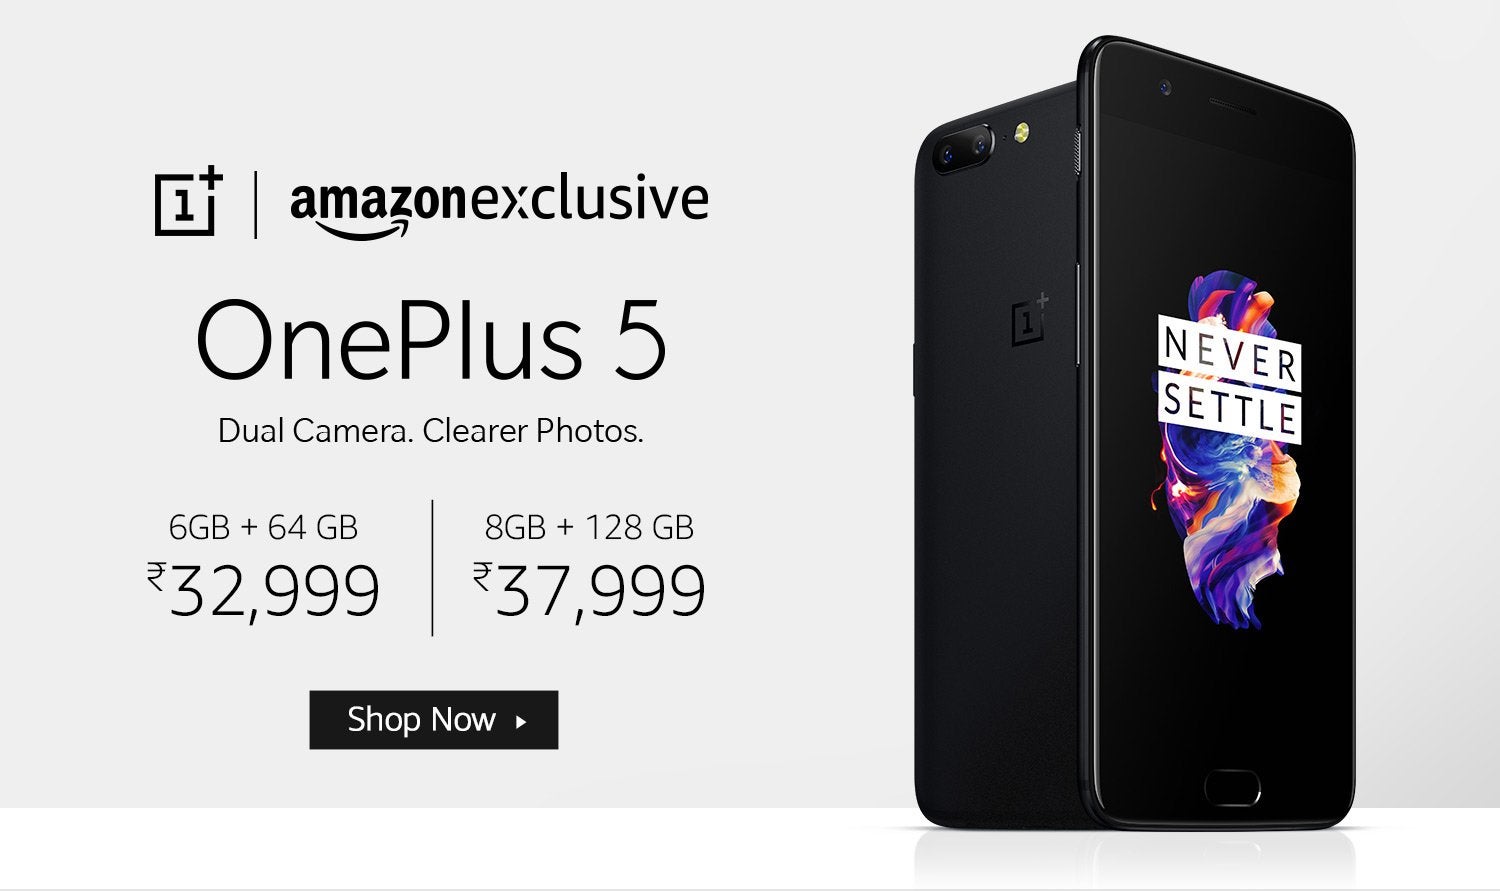 OnePlus 5 advert, as found on Amazon.in - Rumor: OnePlus 5T to launch on the 16th of November as an Amazon exclusive